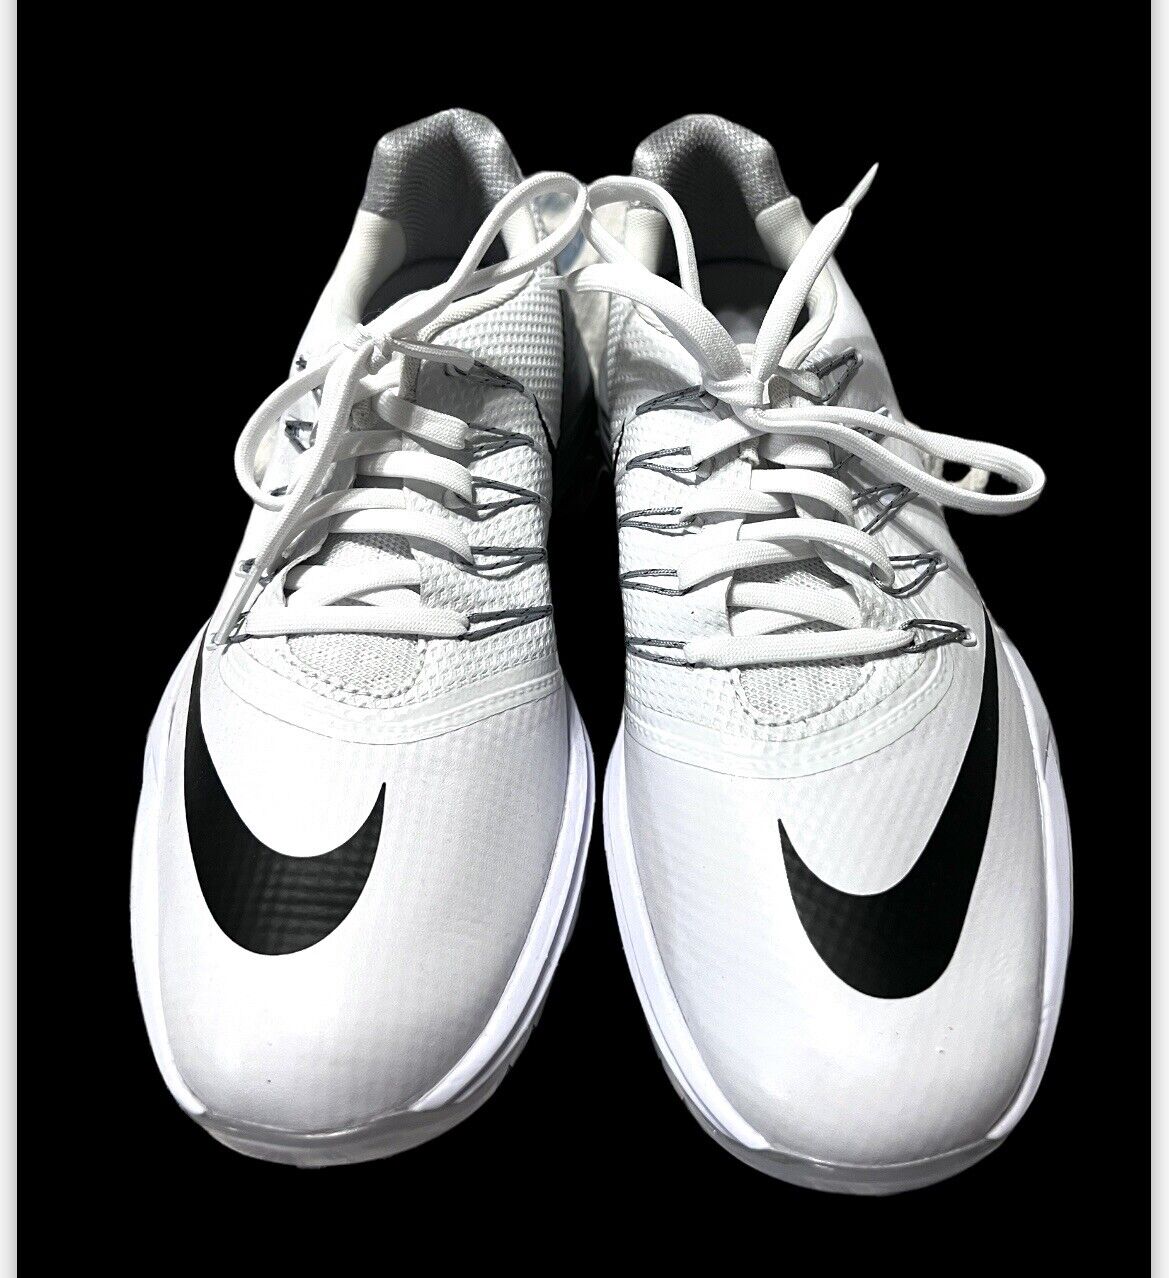 Max 65% OFF Nike Lunar Control 4 Women’s Size Spikes Whit Golf Black 9 Popular product Shoes